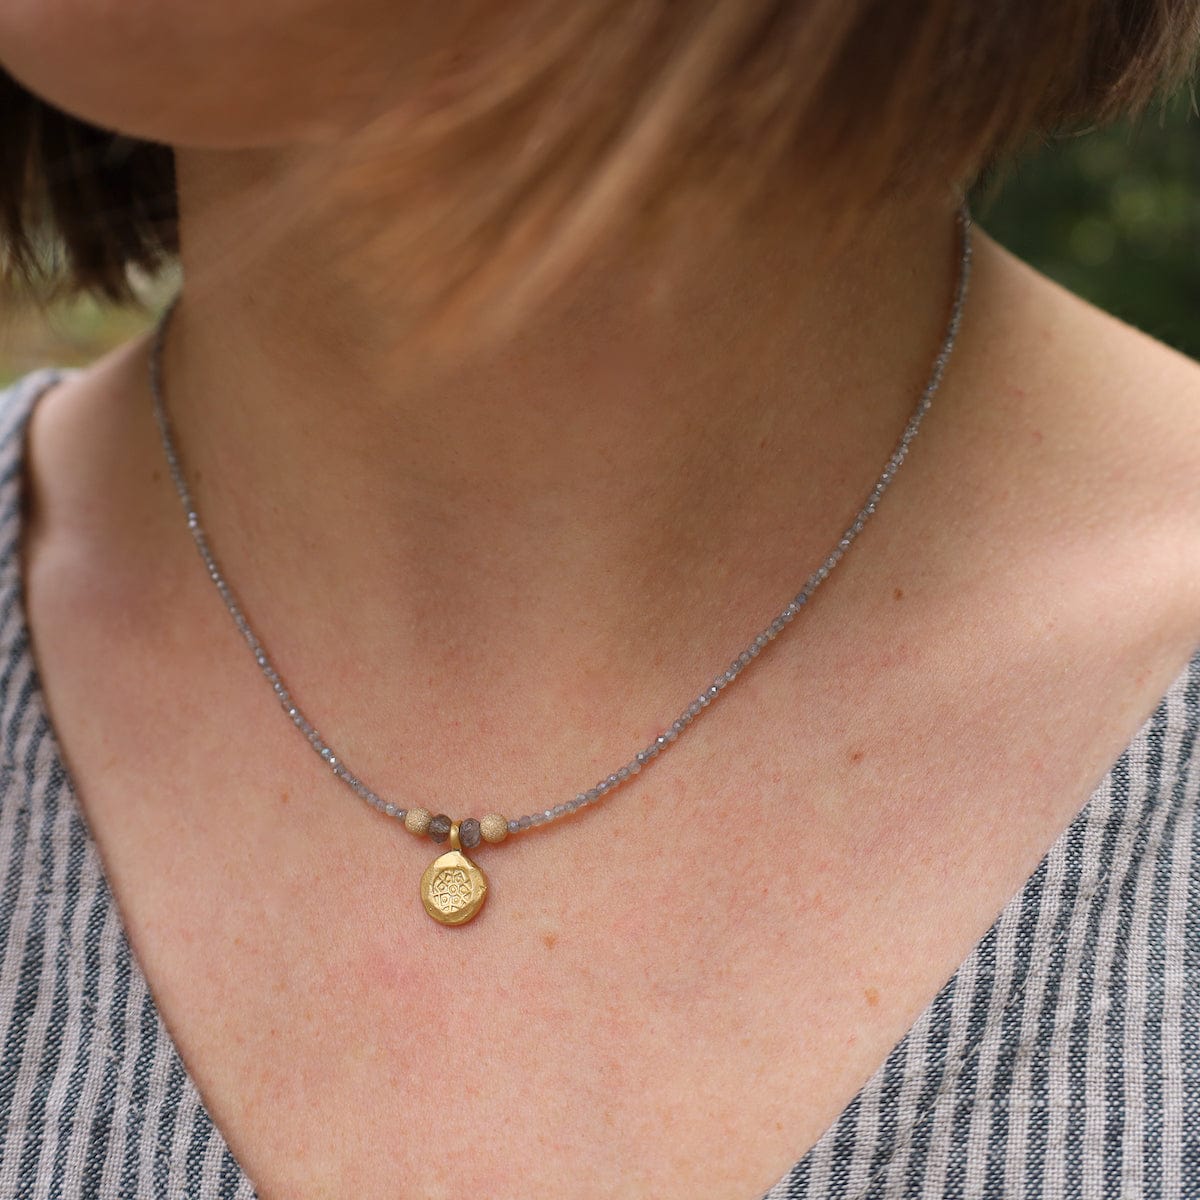 NKL-GF Strung Labradorite with Gold Charm Necklace